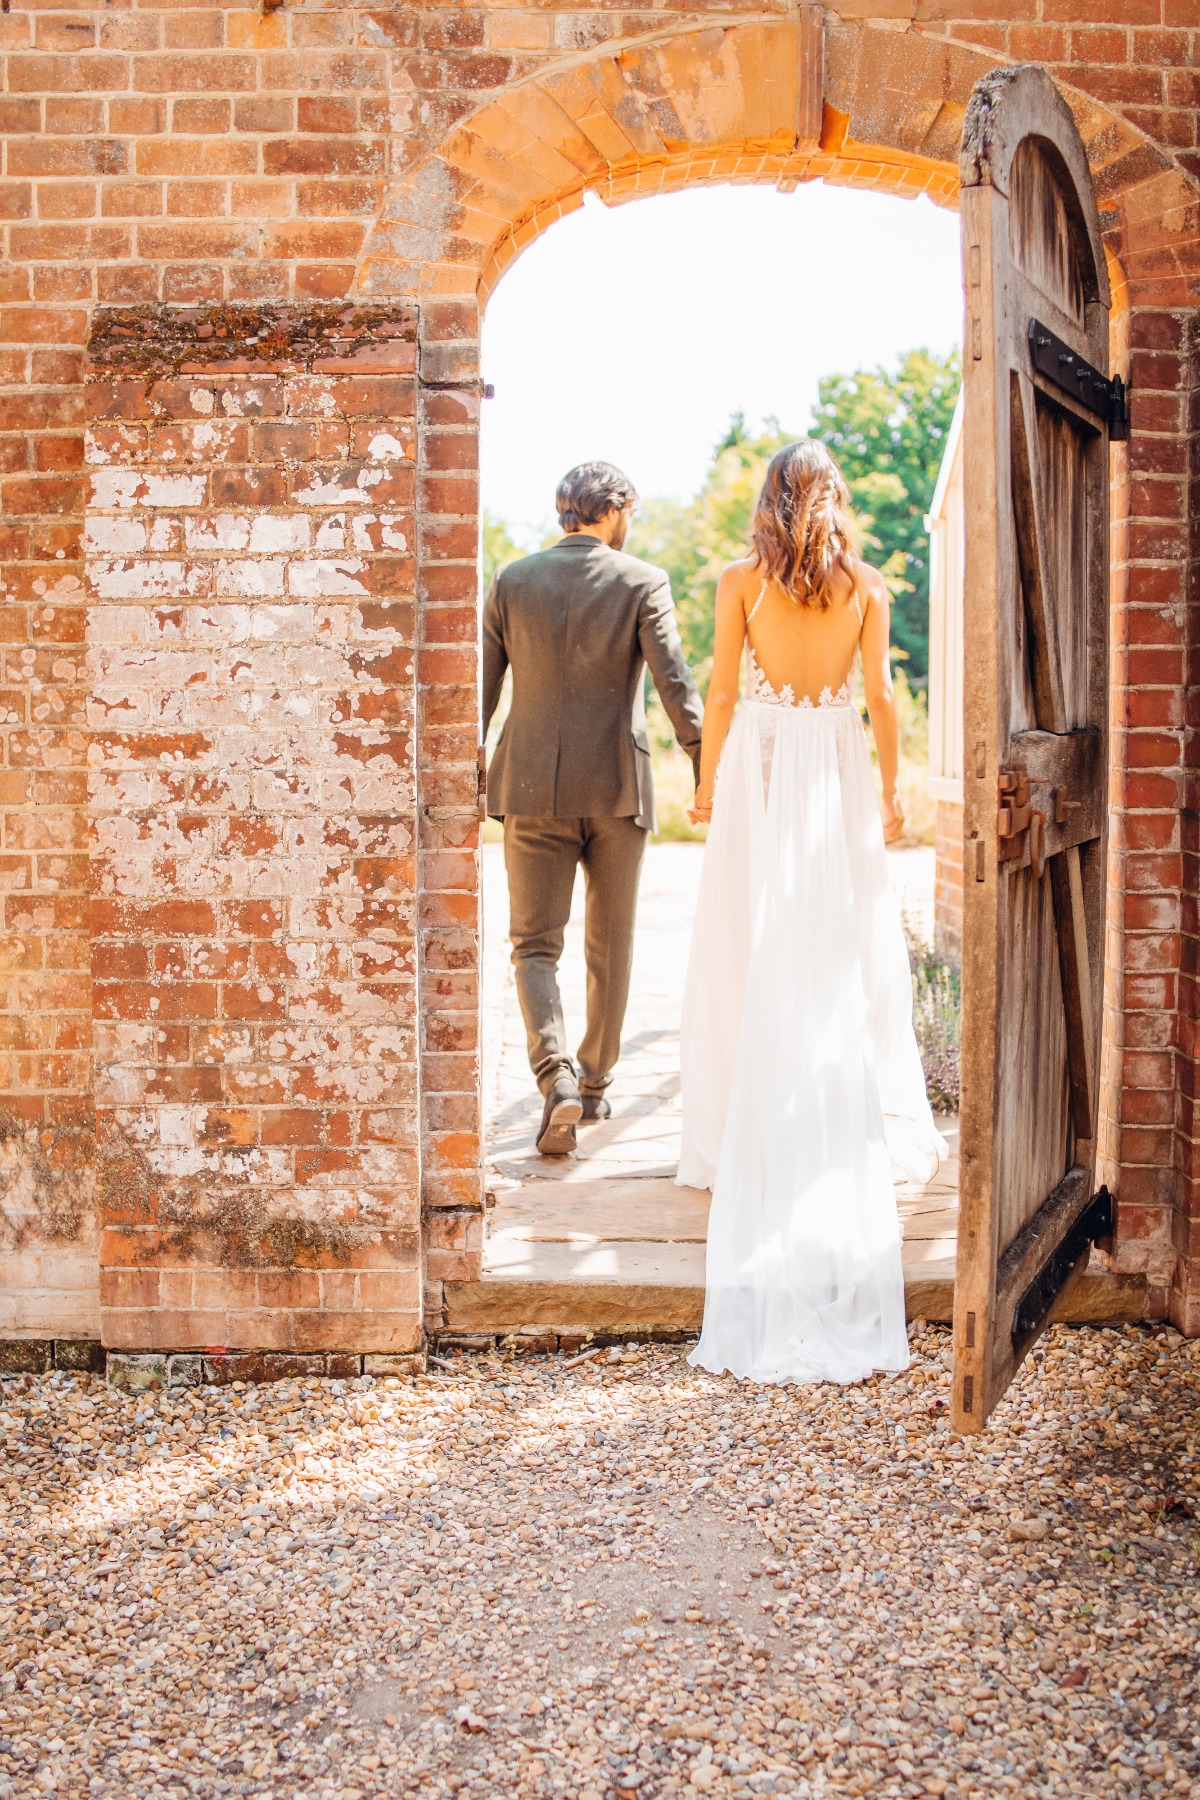 A French Countryside Wedding in a Victorian Glasshouse